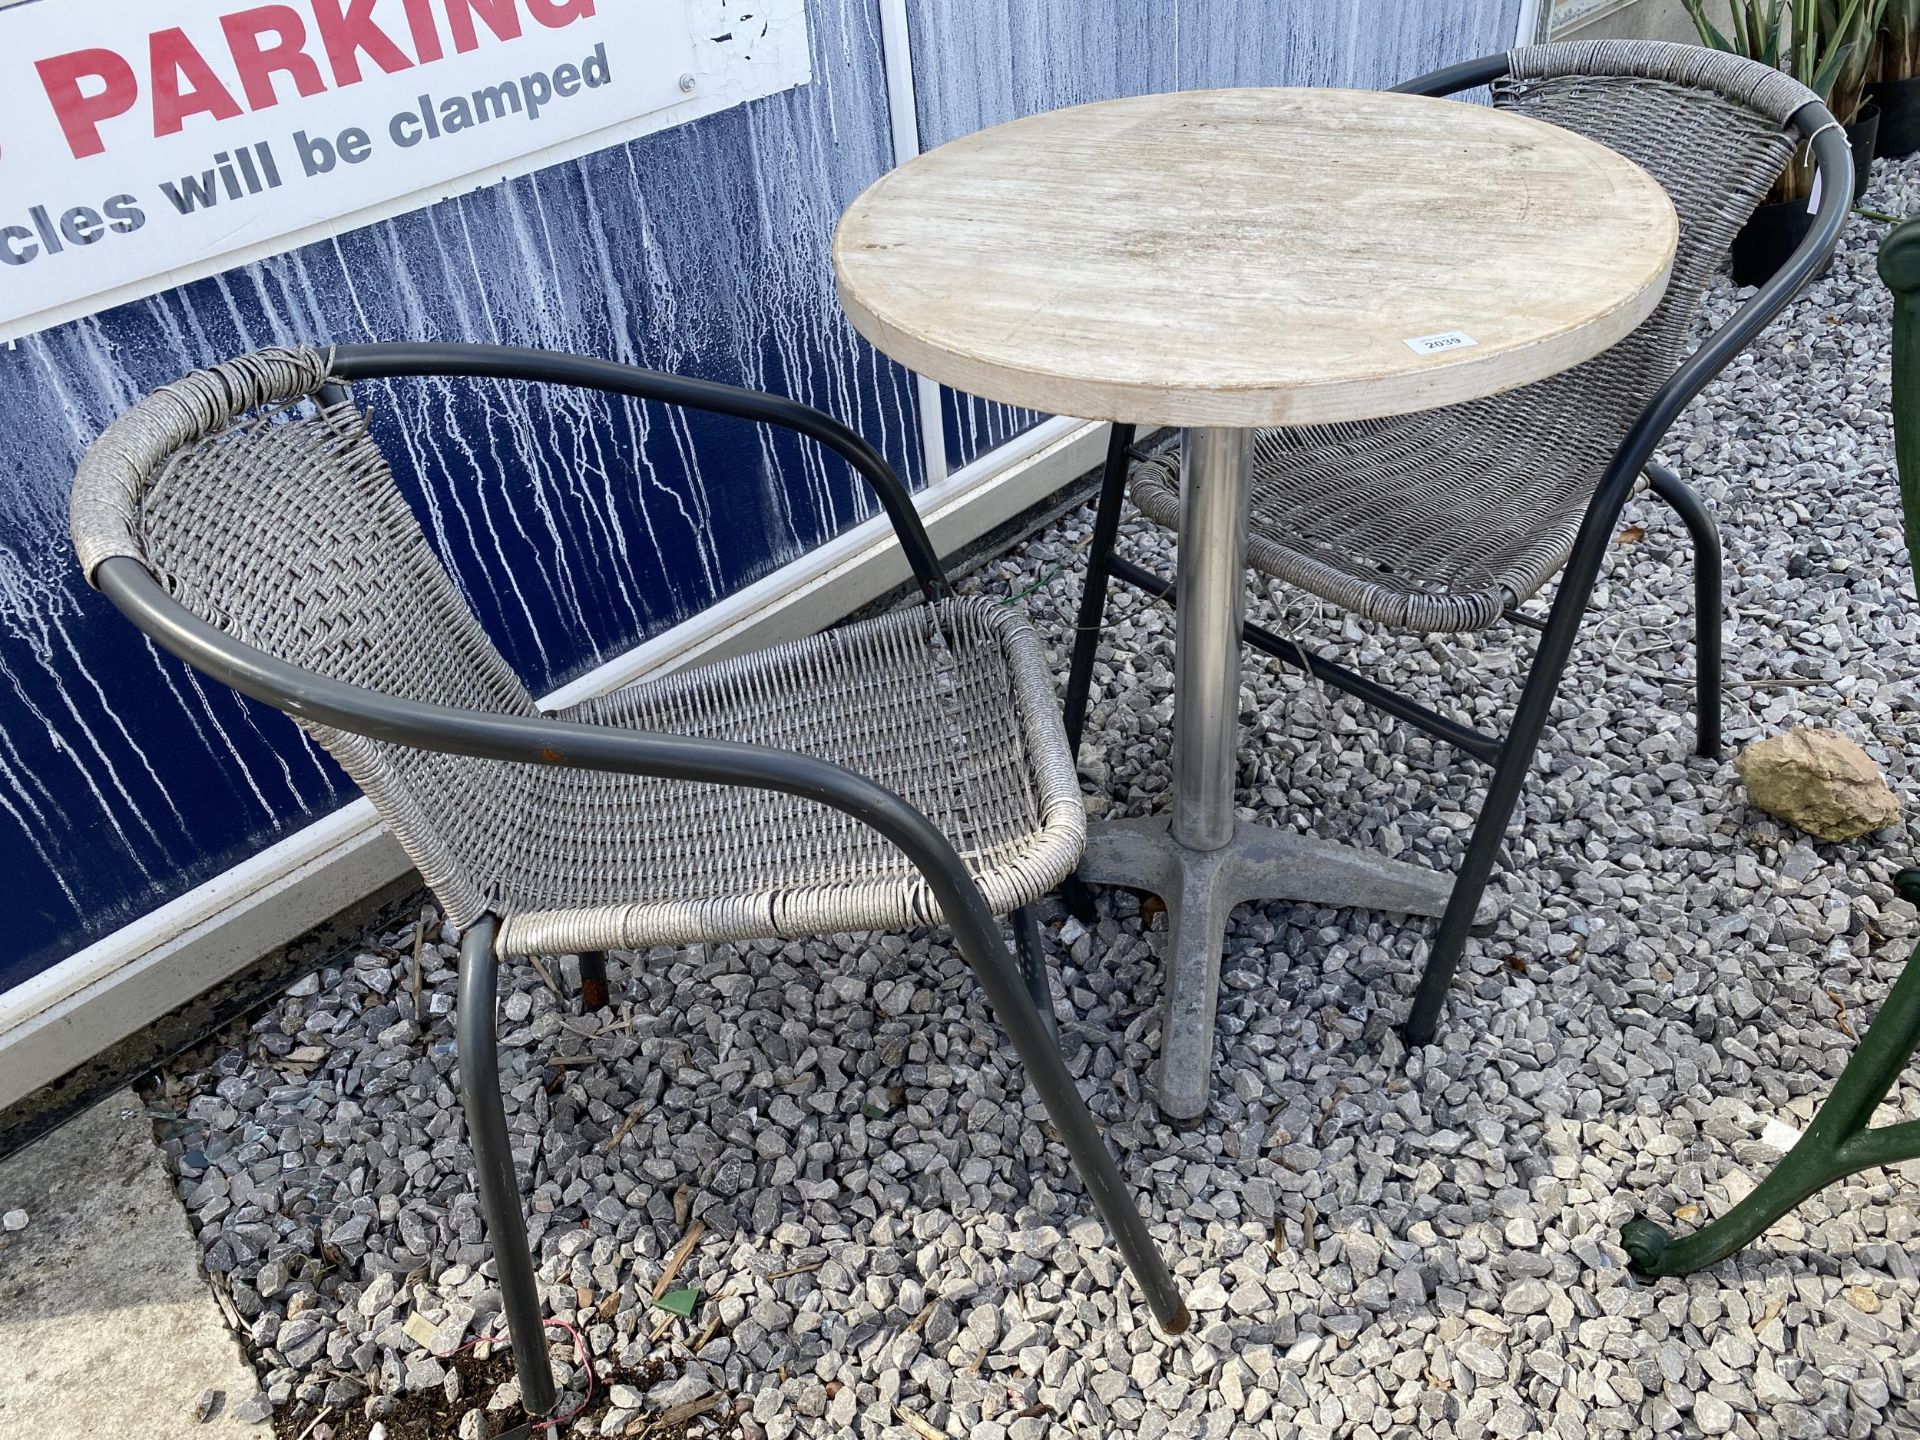 A BISTRO TABLE AND TWO CHAIRS